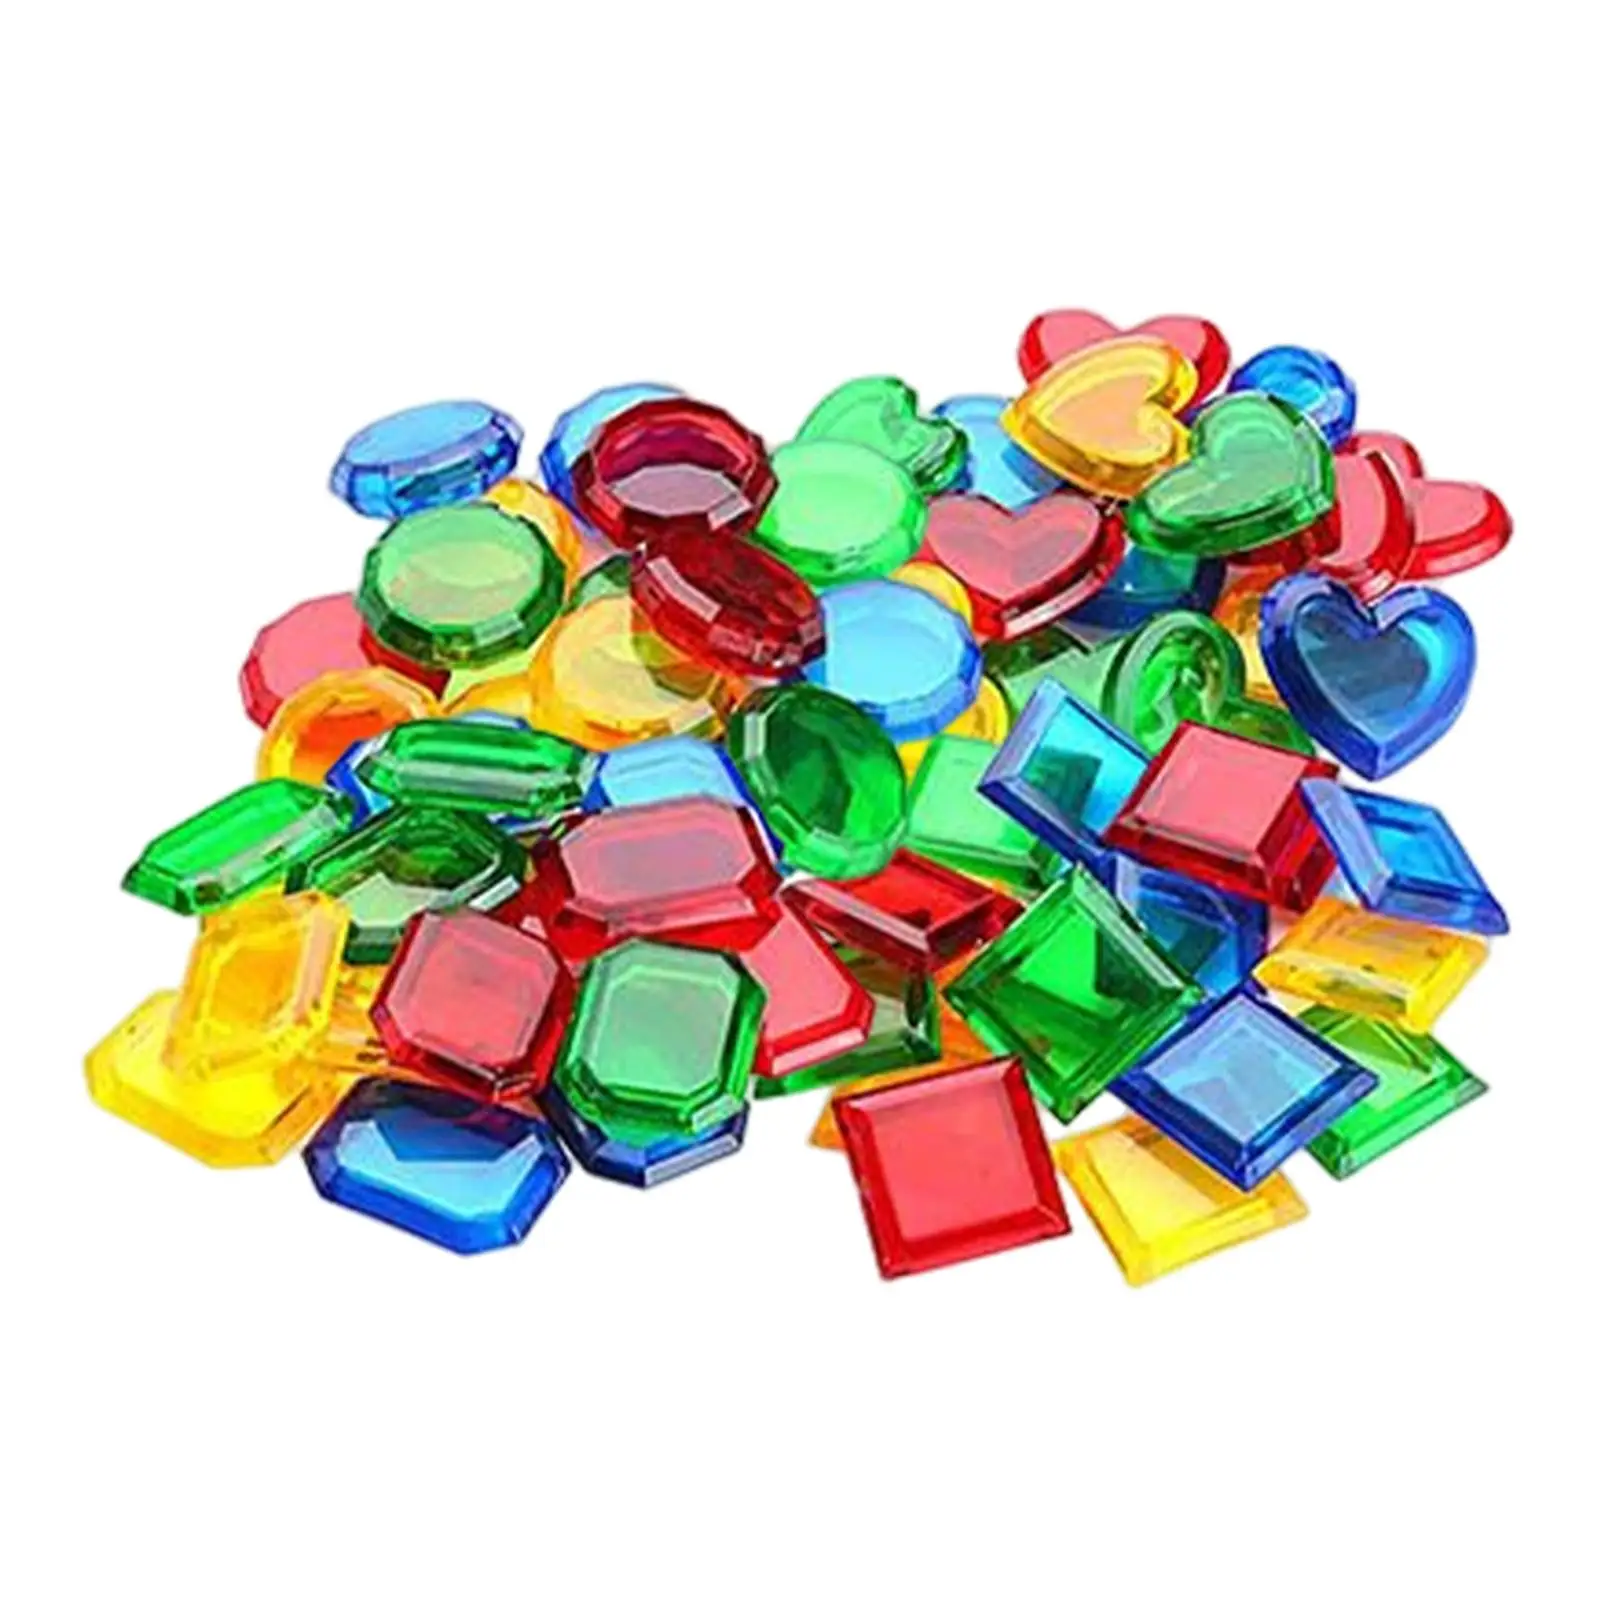 32 Pieces Dive Throw Toy Interactive Toys Drop Resistant for Adults Kids